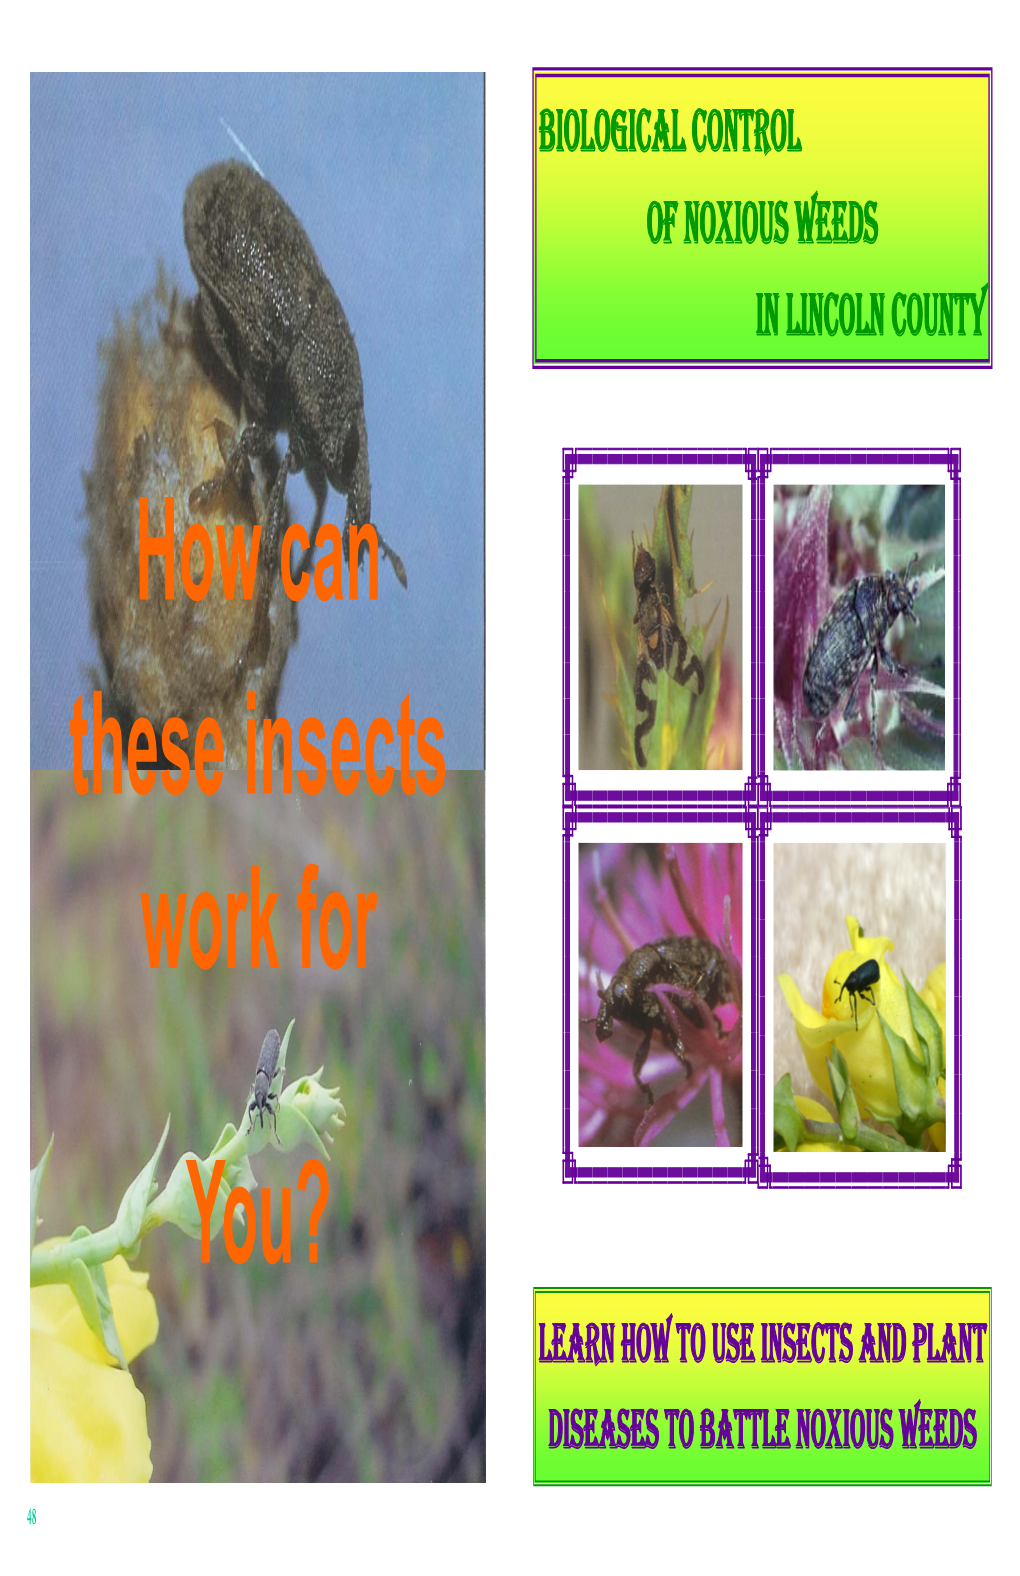 Biological Control of Noxious Weeds in Lincoln County